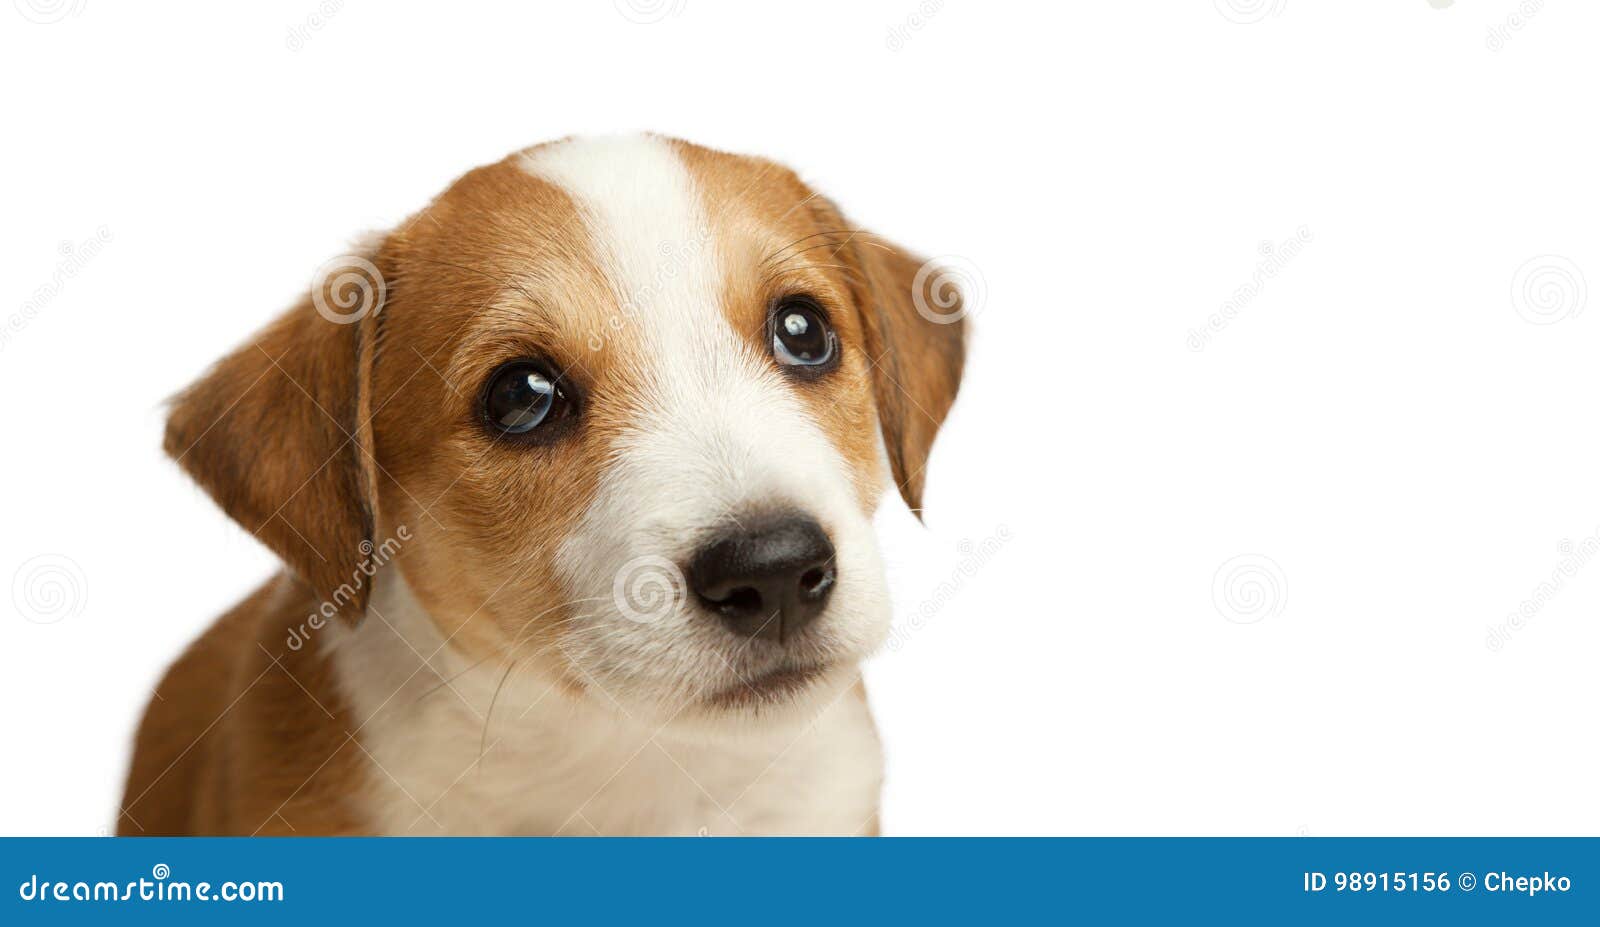 jack russell terrier puppy sad pleading look isolate on white